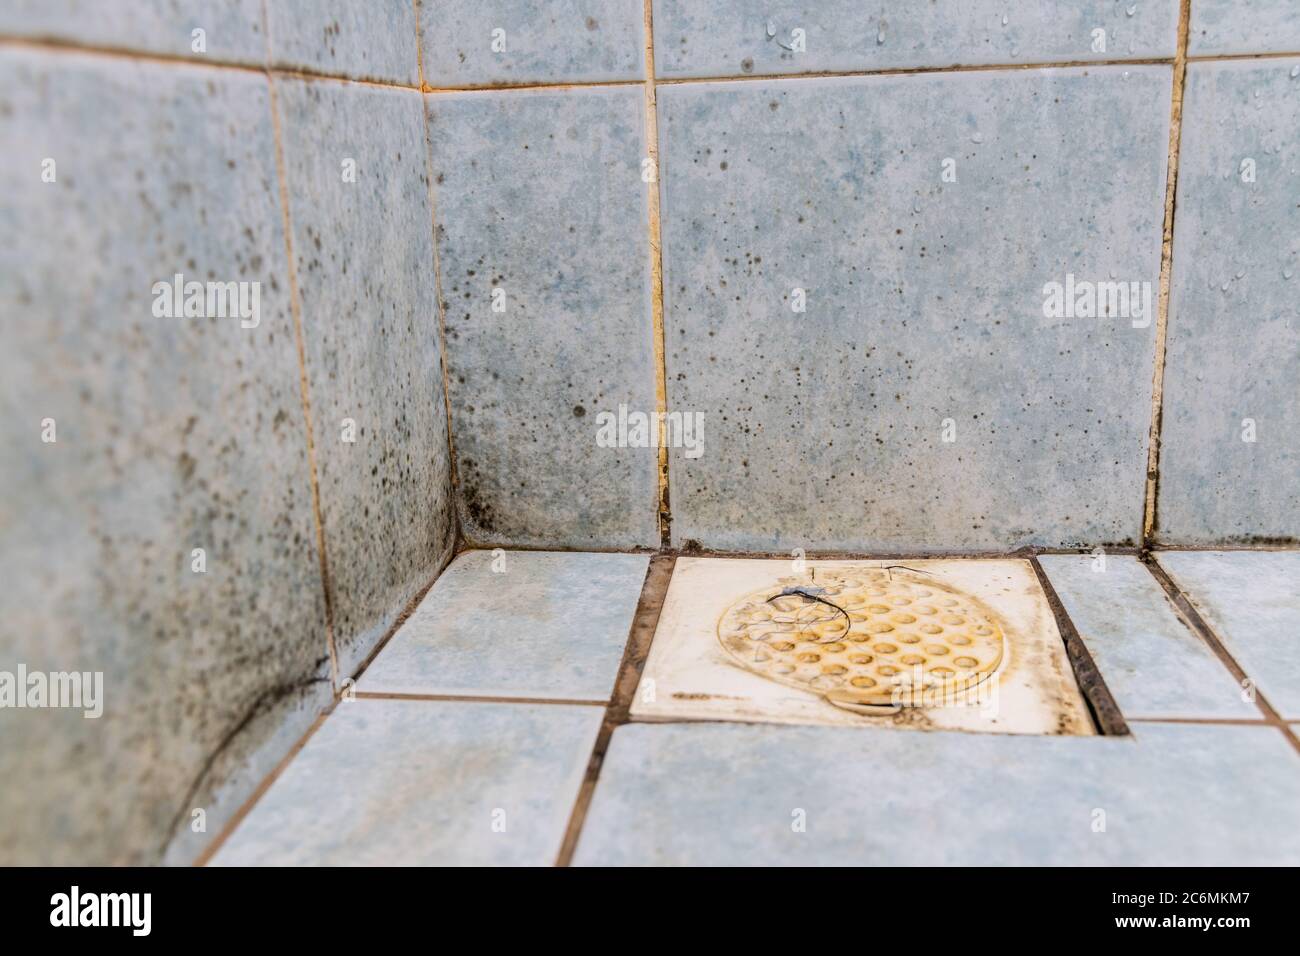 Mildew, dirty unhygienic mold growing on bathroom wall tile surface Stock Photo